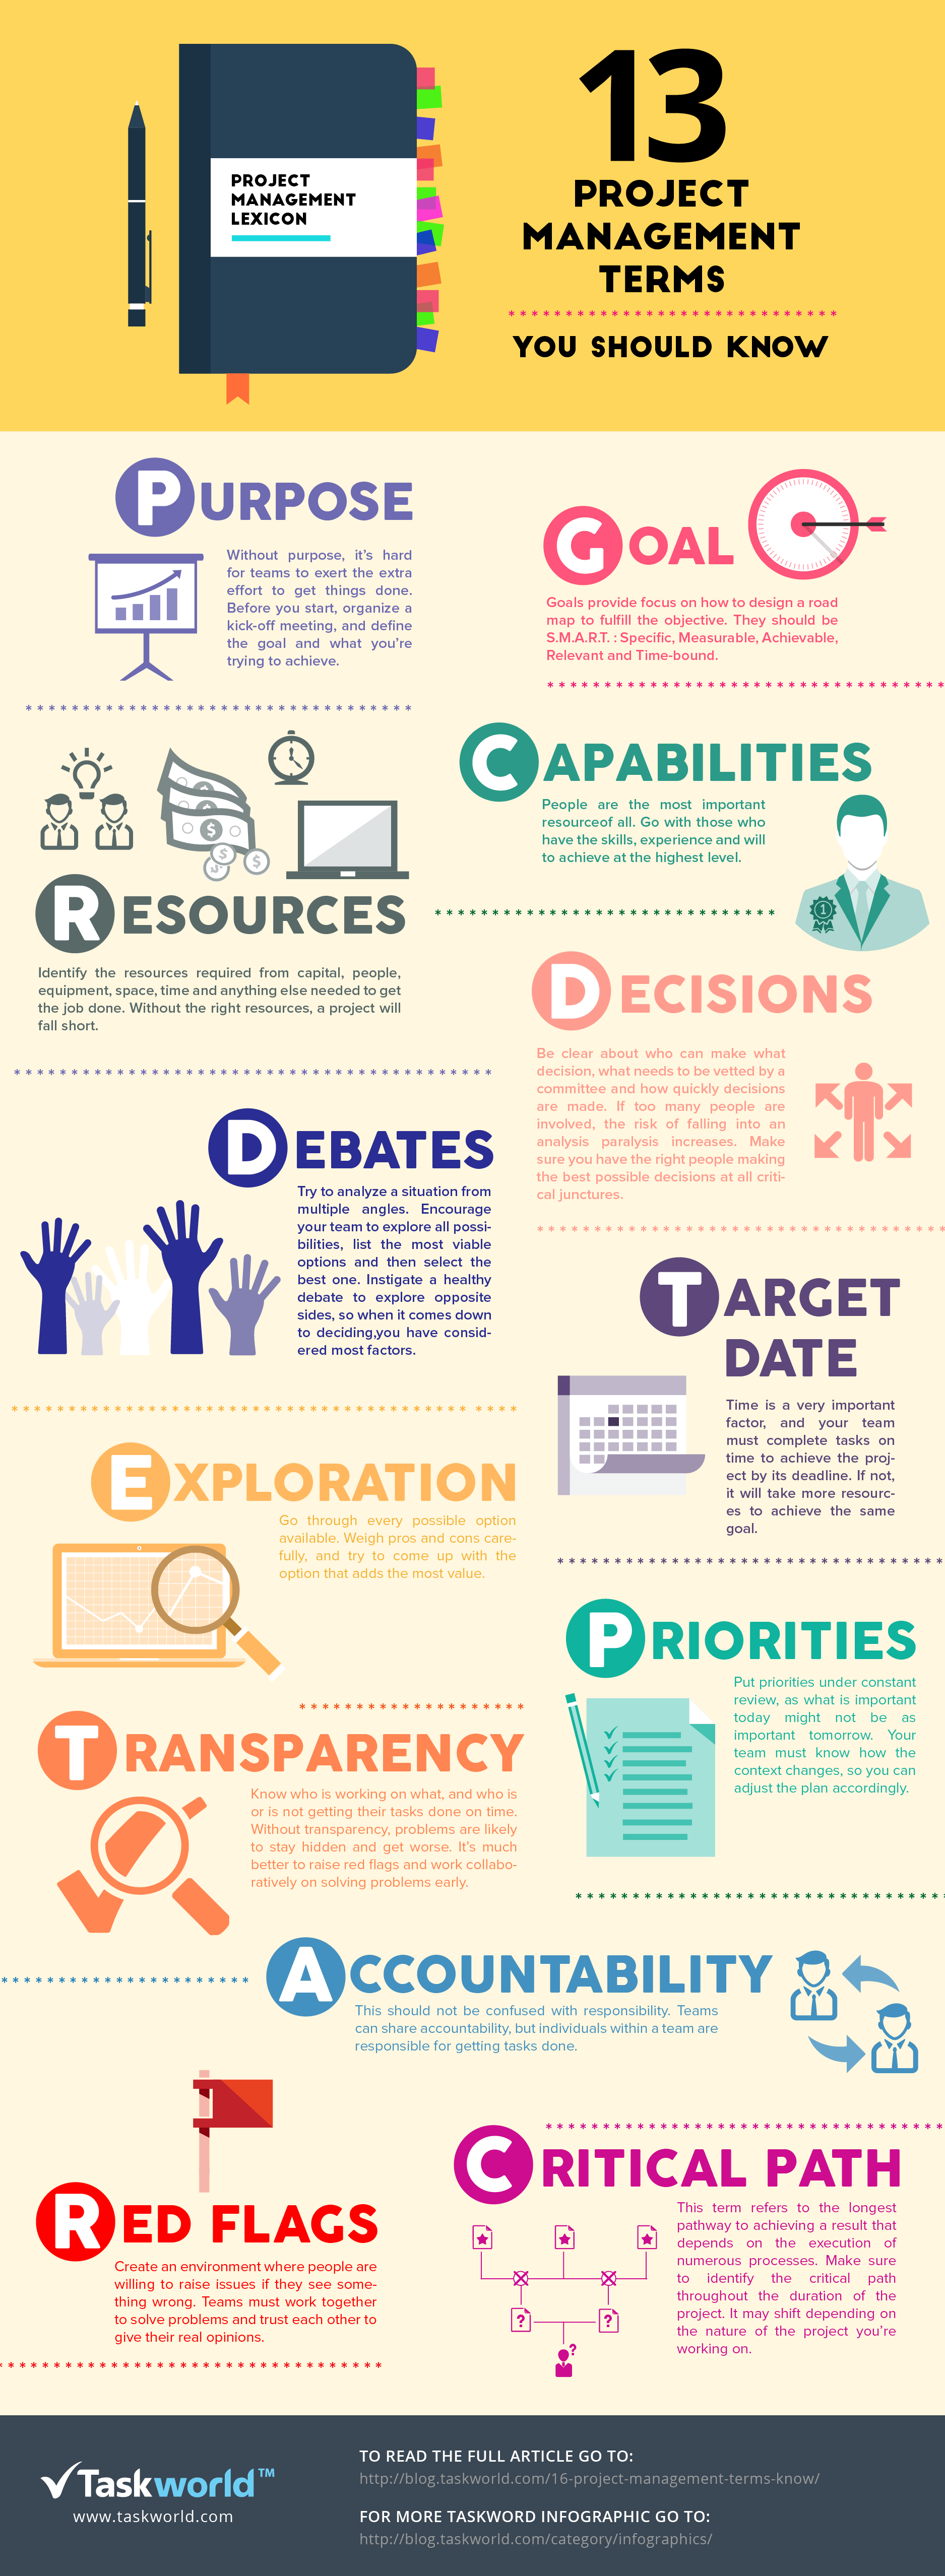 Top 13 Project Management Terms Infographic - e-Learning Infographics